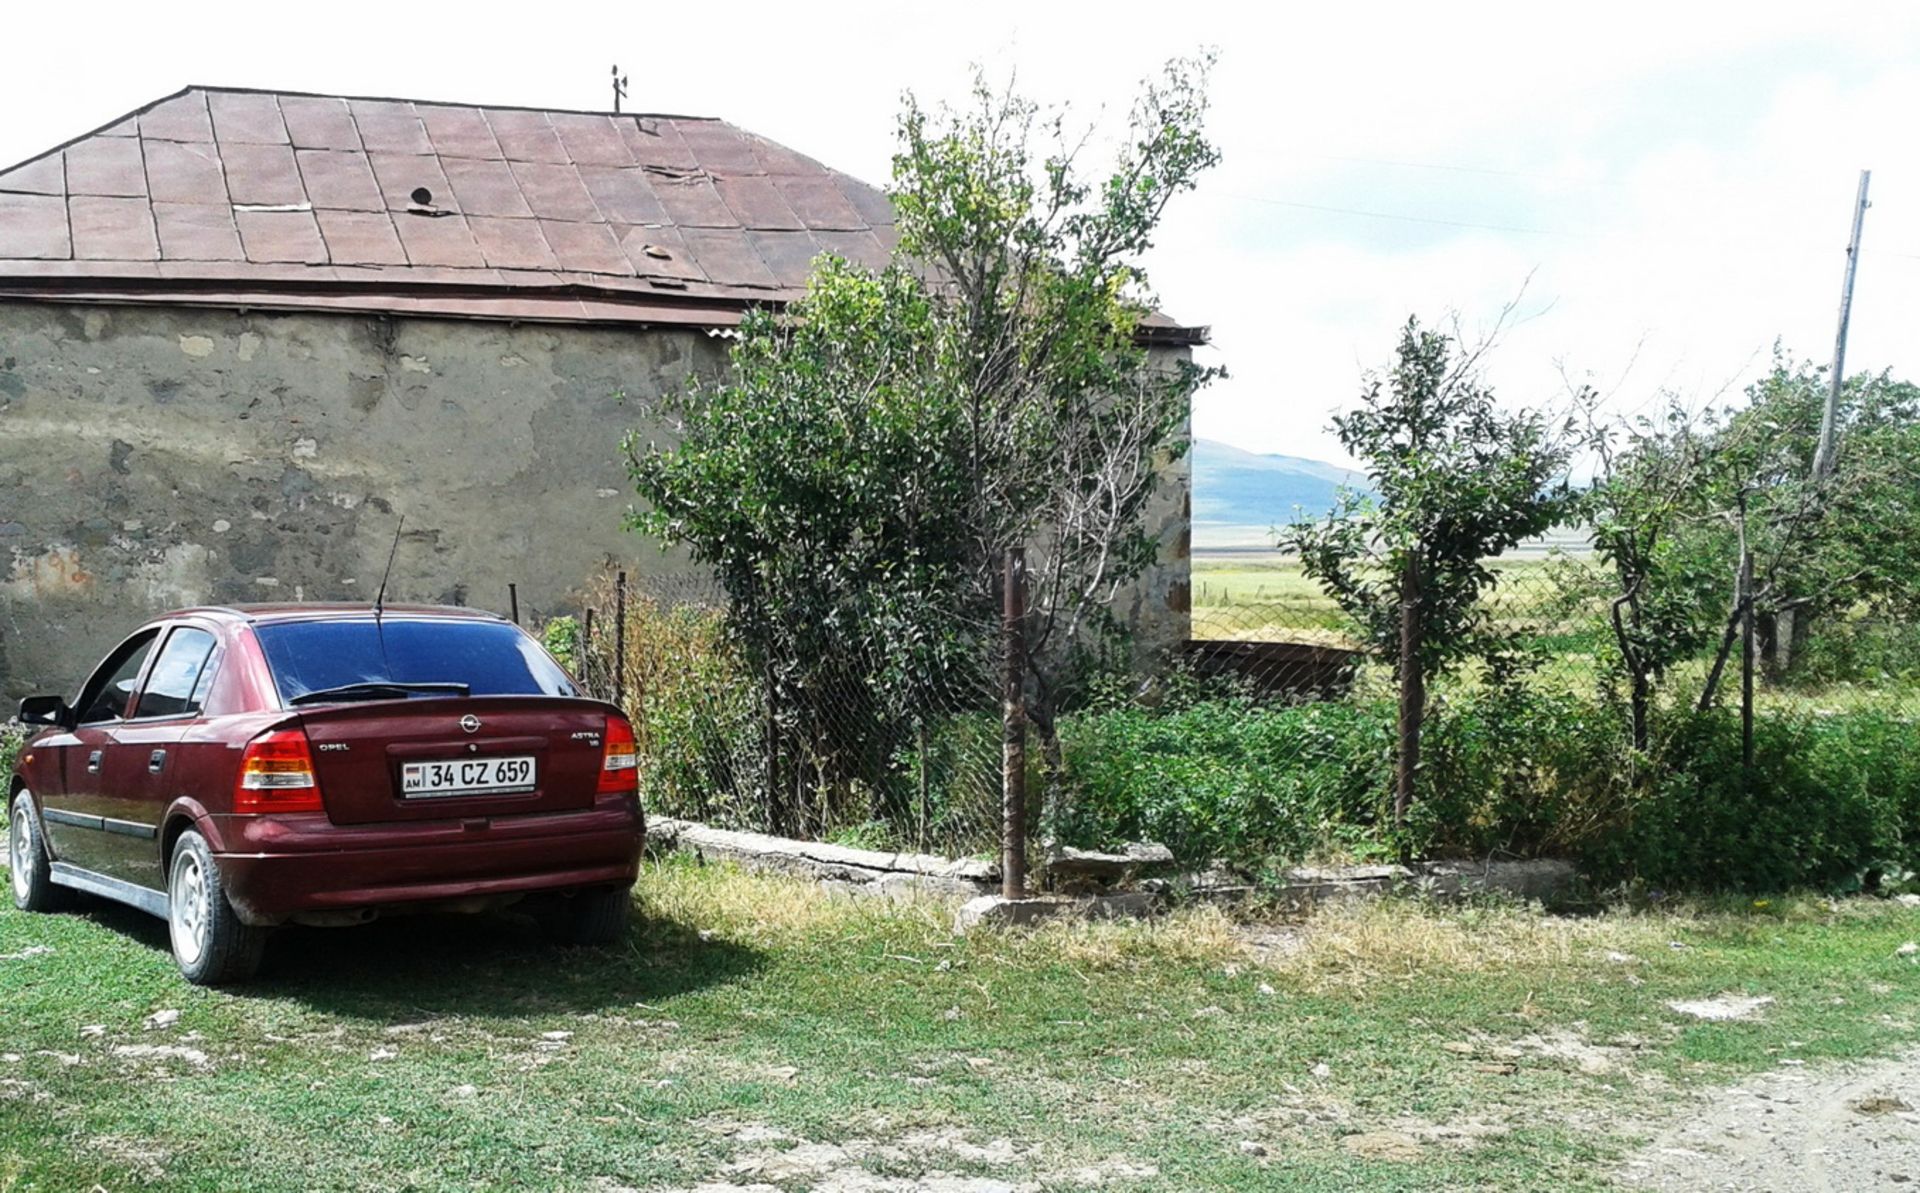 HOUSE IN 1 ACRE IN SOTK, ARMENIA - Image 9 of 35